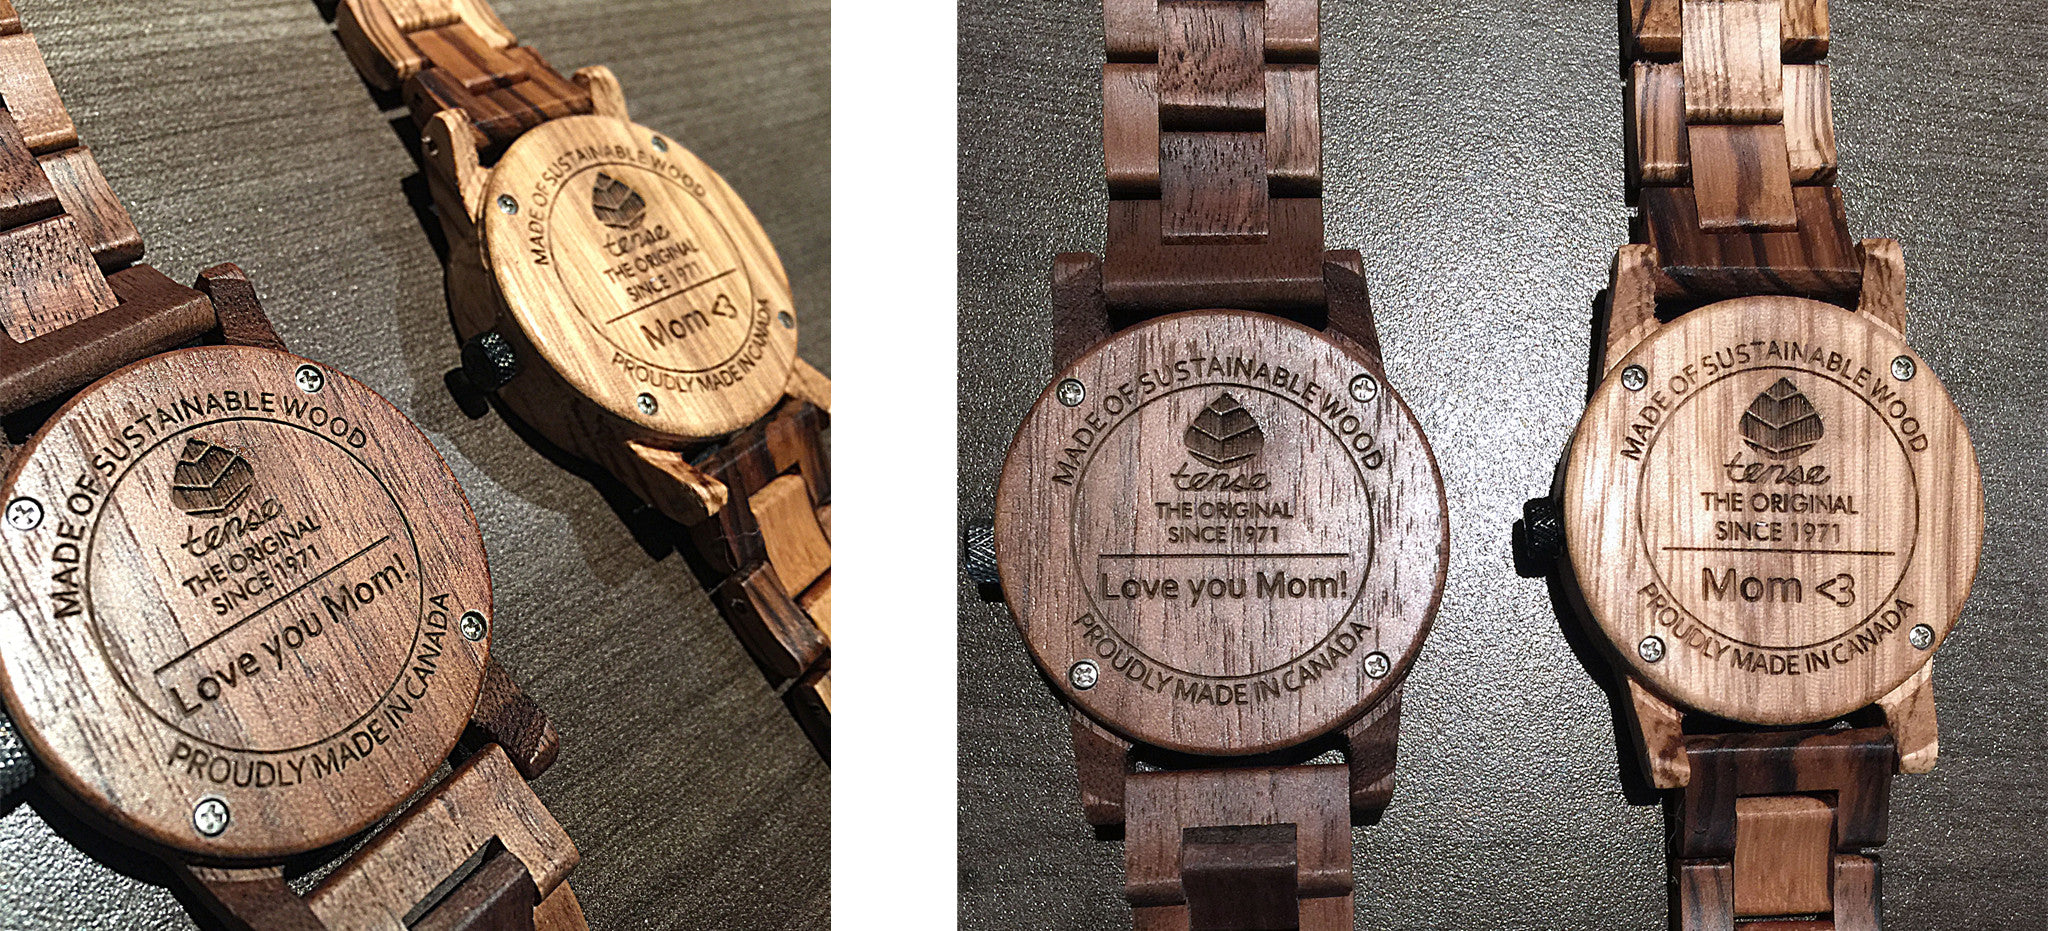 Tense Watches - Custom Engraved Watches For Mother's Day